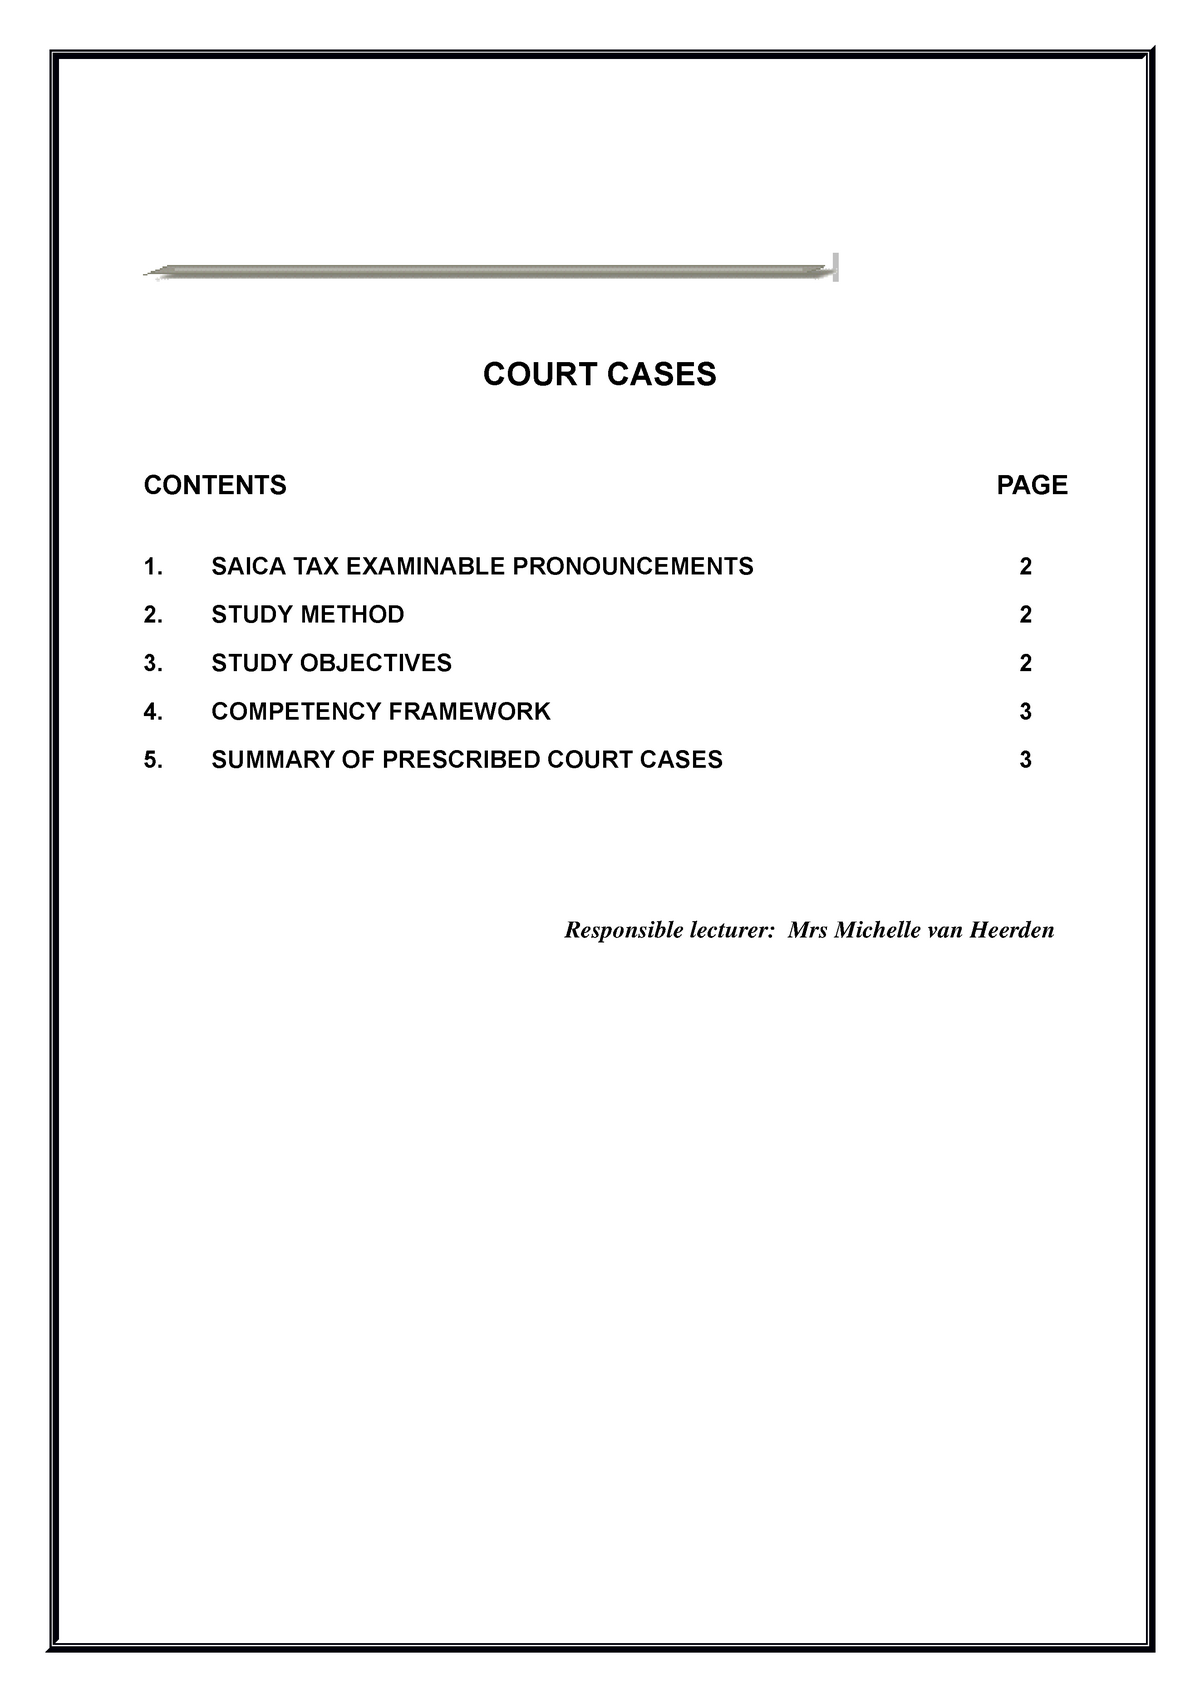 Court Cases Tax COURT CASES CONTENTS PAGE 1. SAICA TAX EXAMINABLE